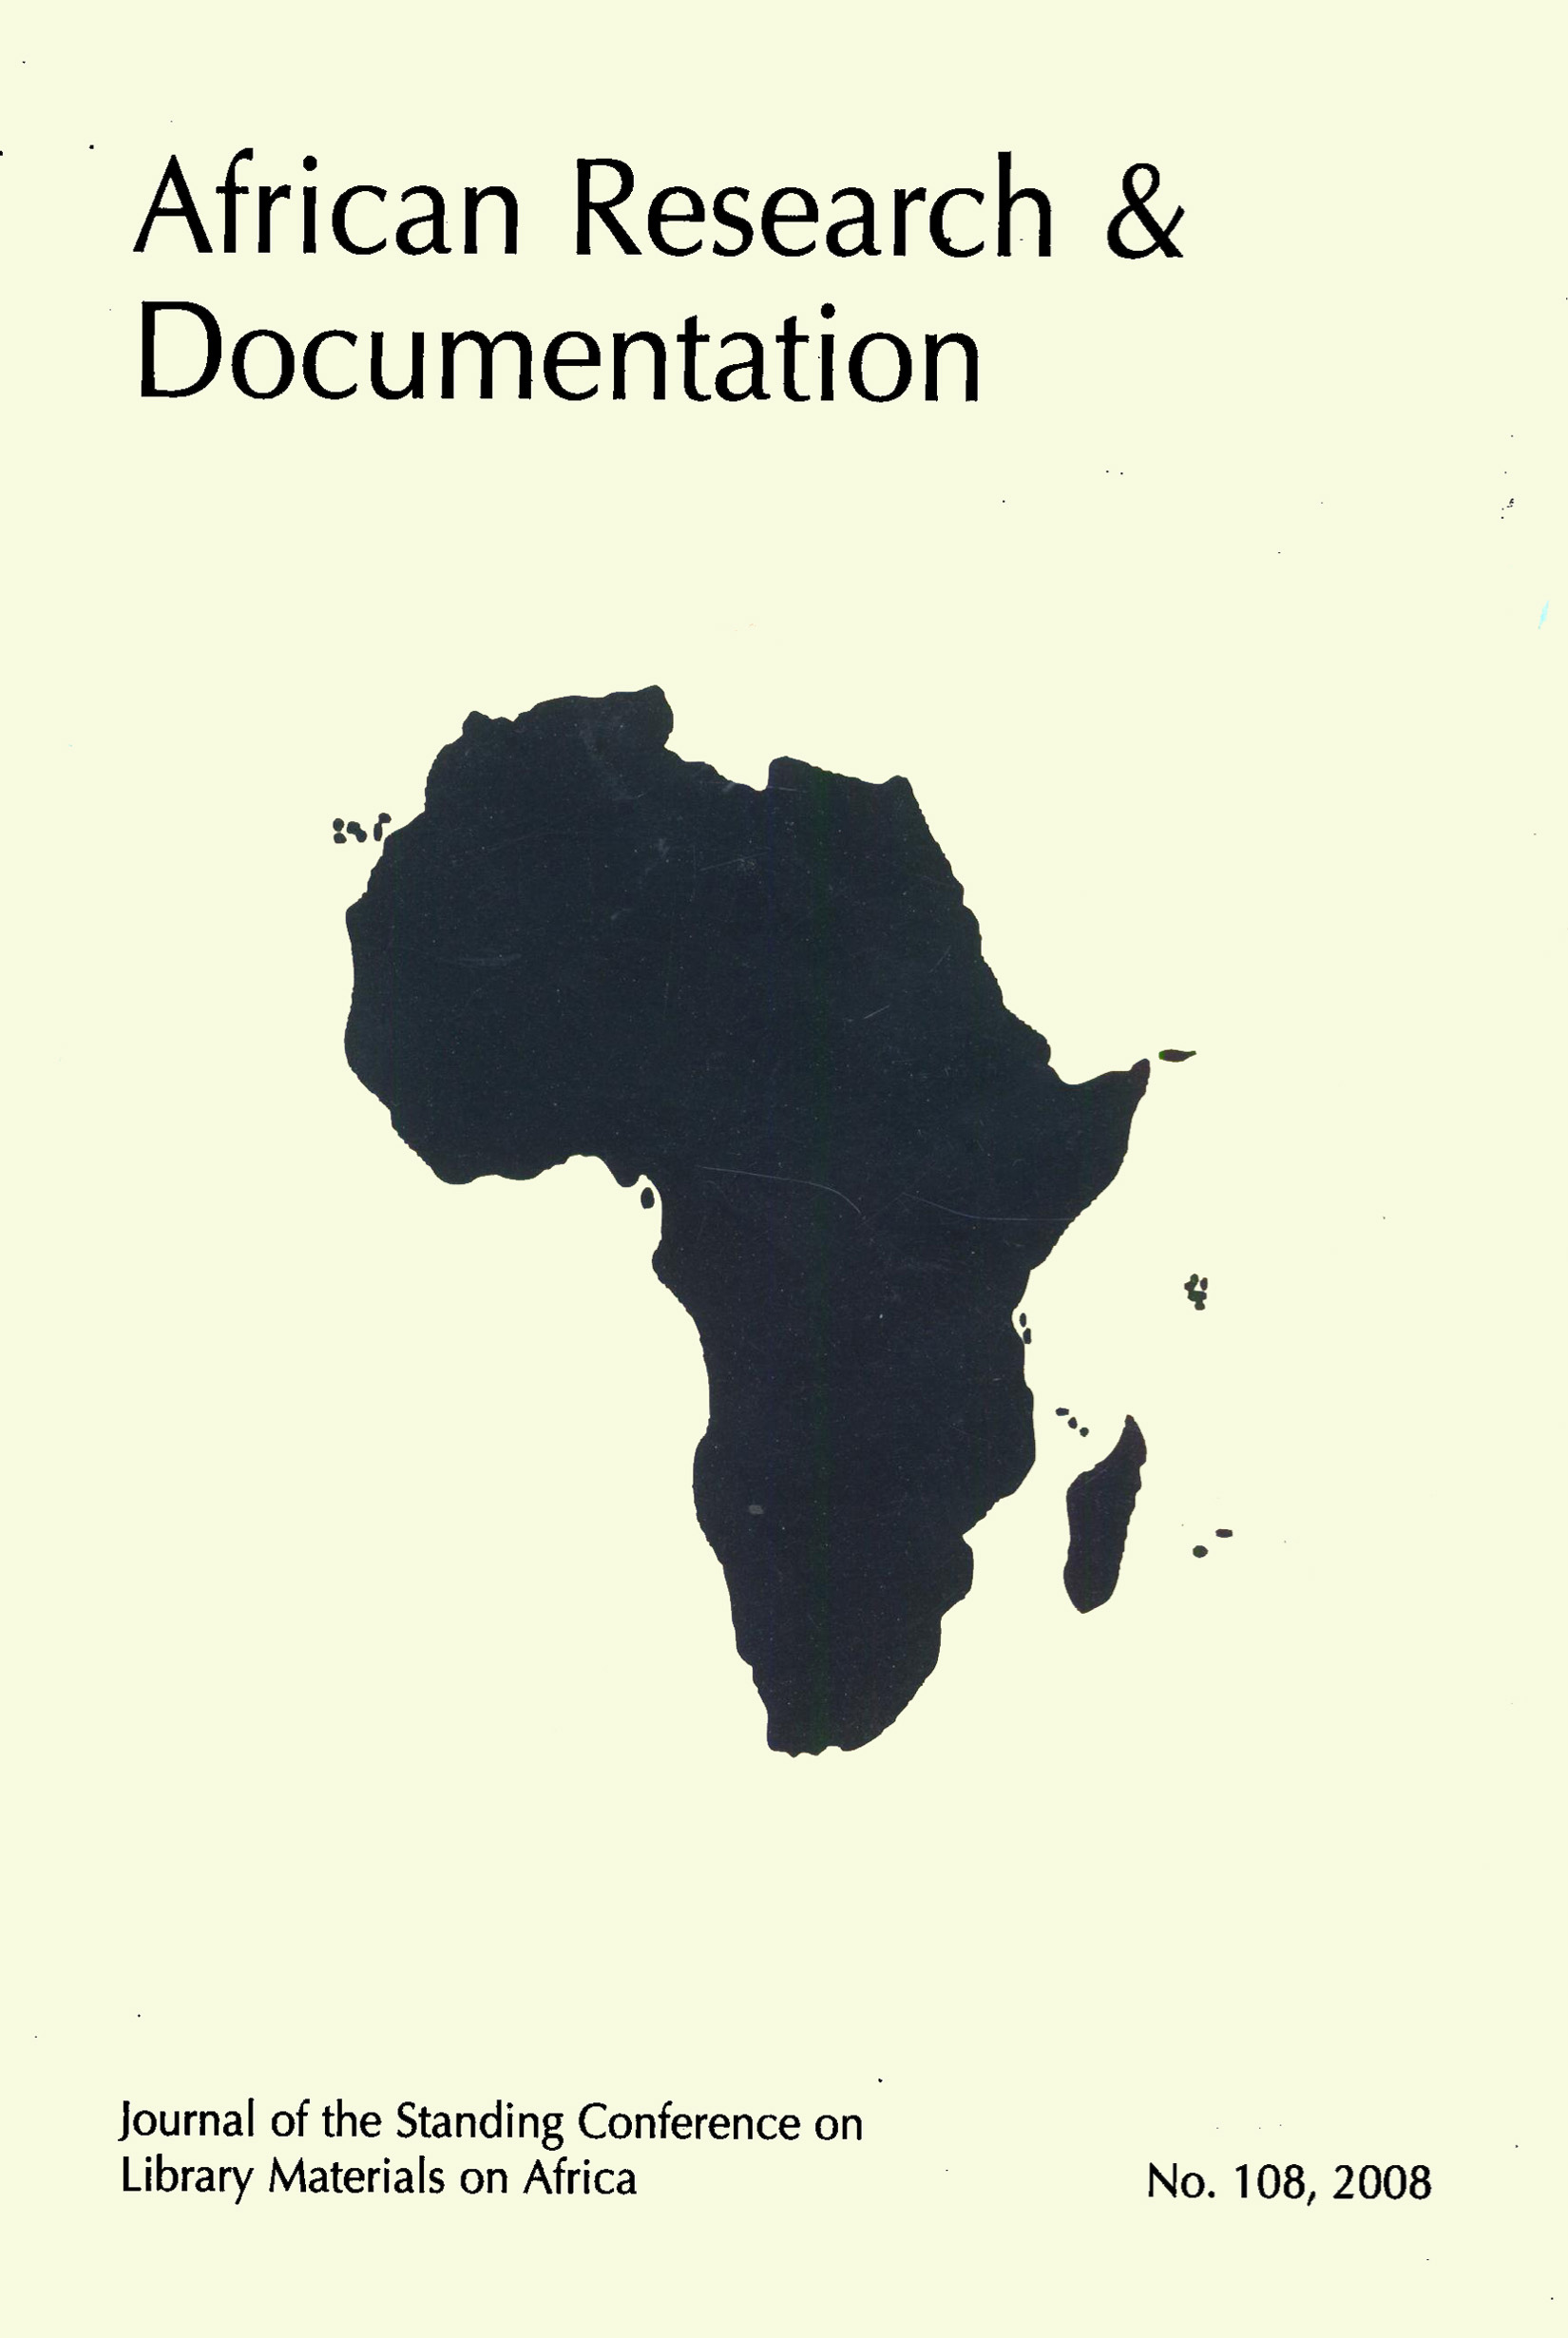 africa bibliography research and documentation